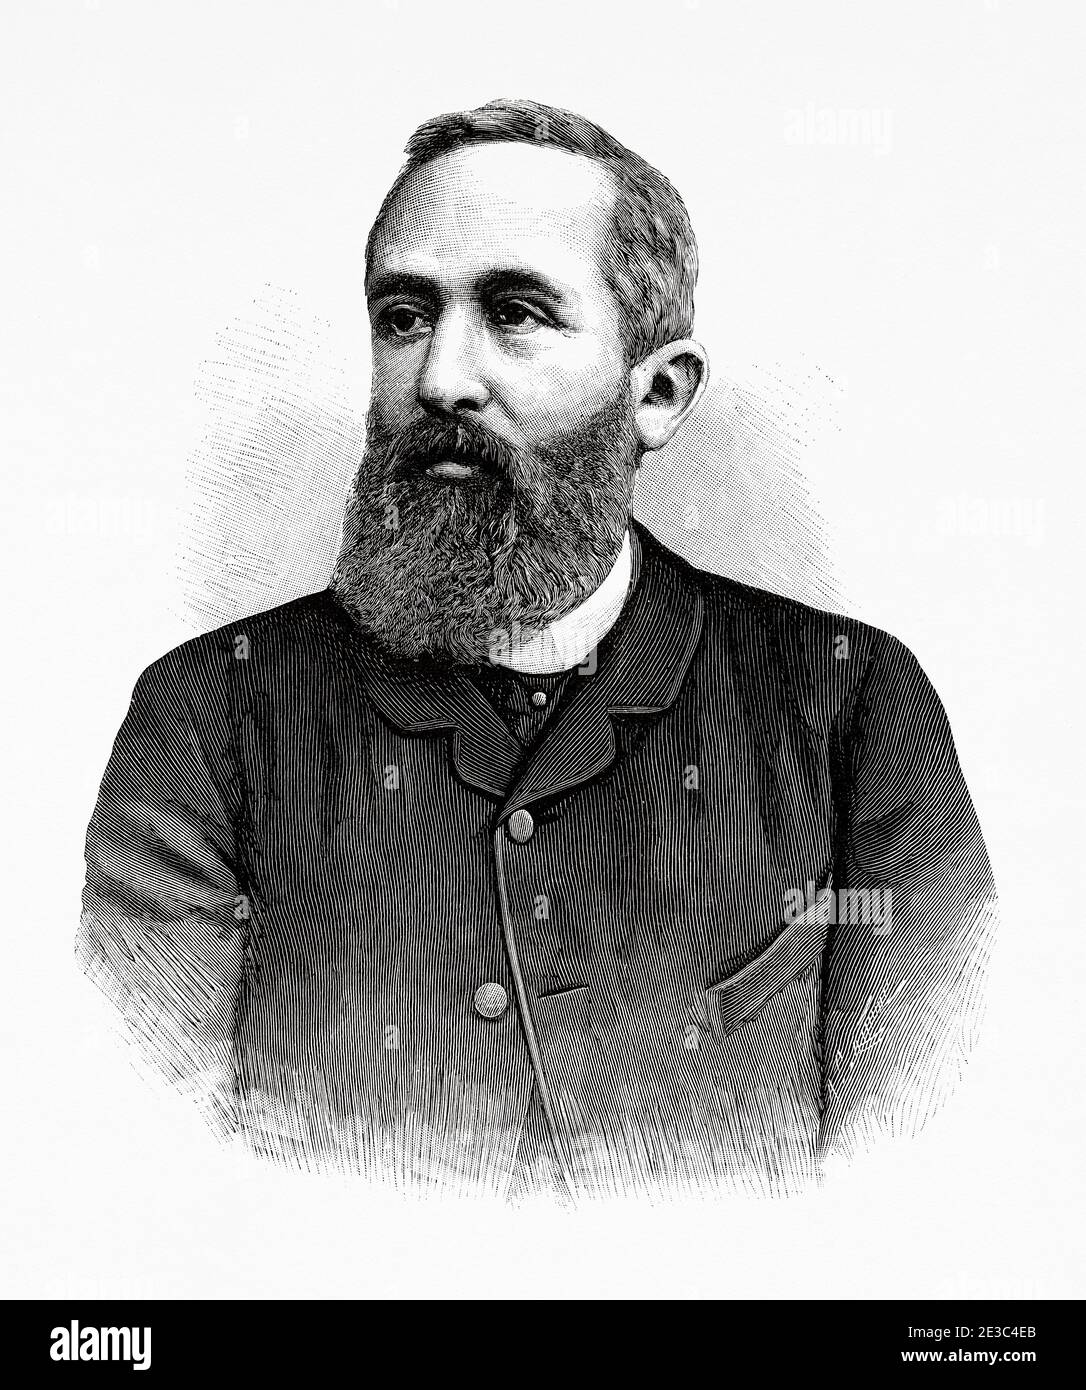 Portrait of Hermann Levi (Giessen 1839 - Munich 1900) was a German conductor, conductor of the Rotterdam, Karlsruhe and Munich operas. Germany. Old XIX century engraved illustration from La Ilustracion Española y Americana 1894 Stock Photo